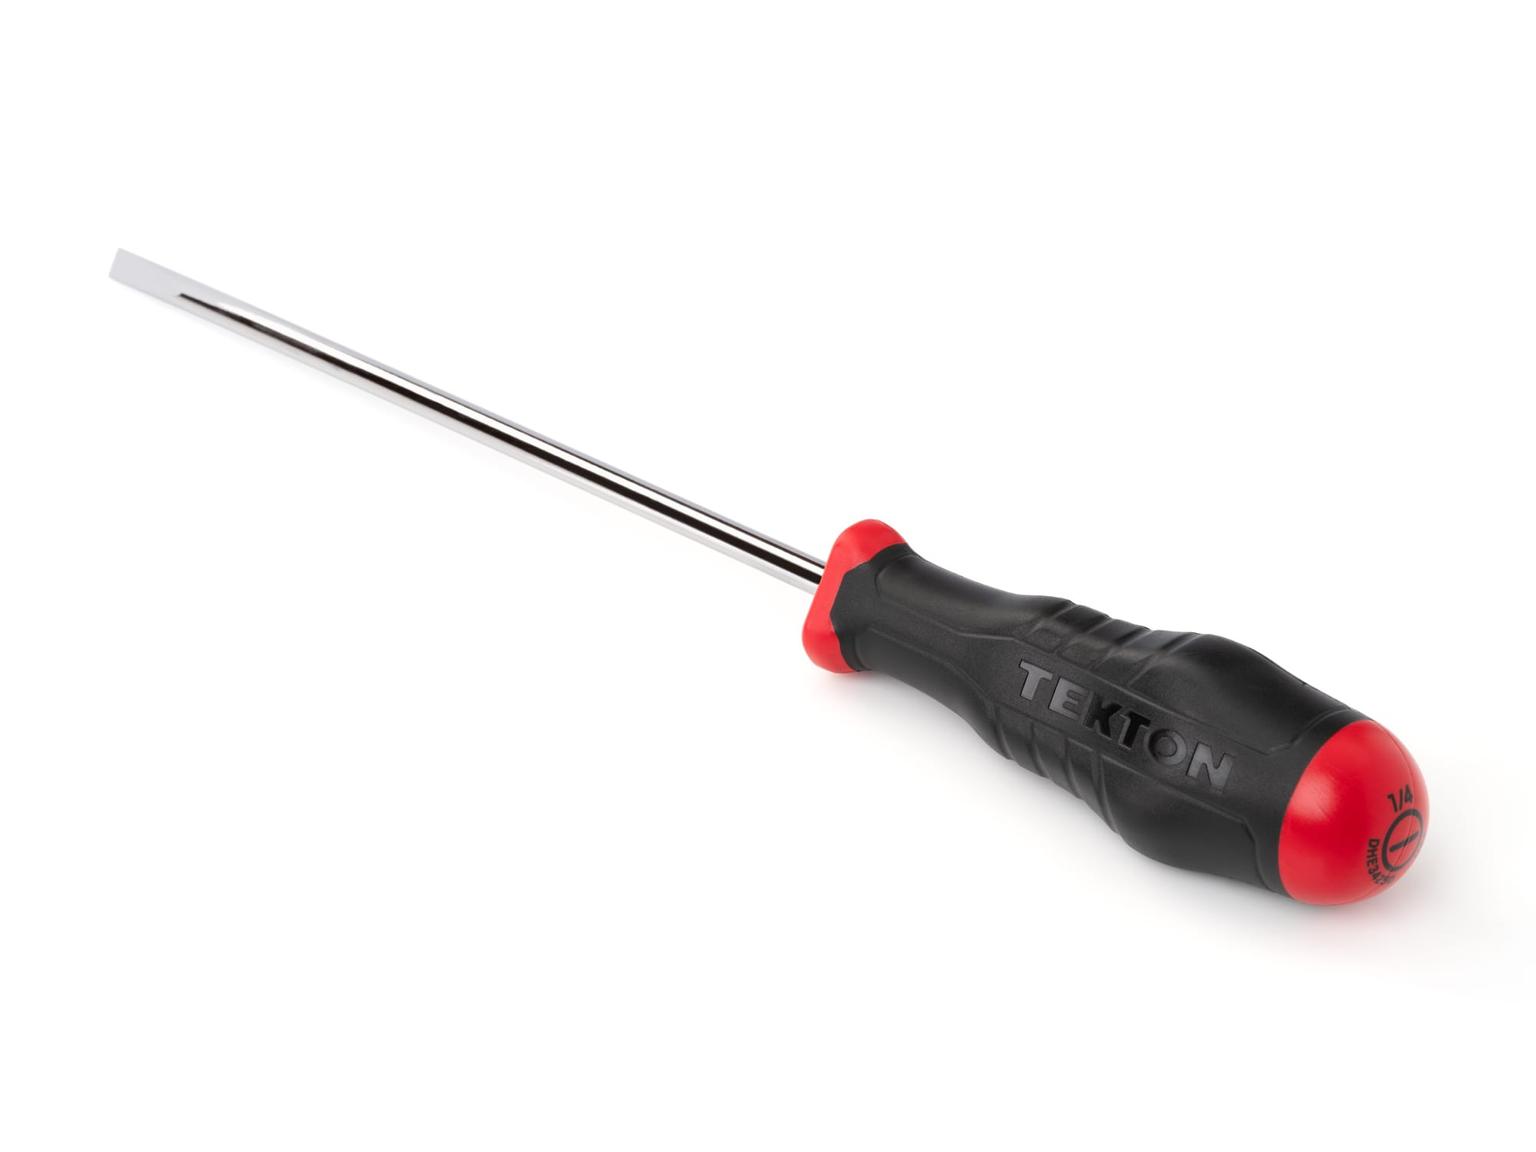 TEKTON DHE34250-T Long 1/4 Inch Slotted High-Torque Screwdriver